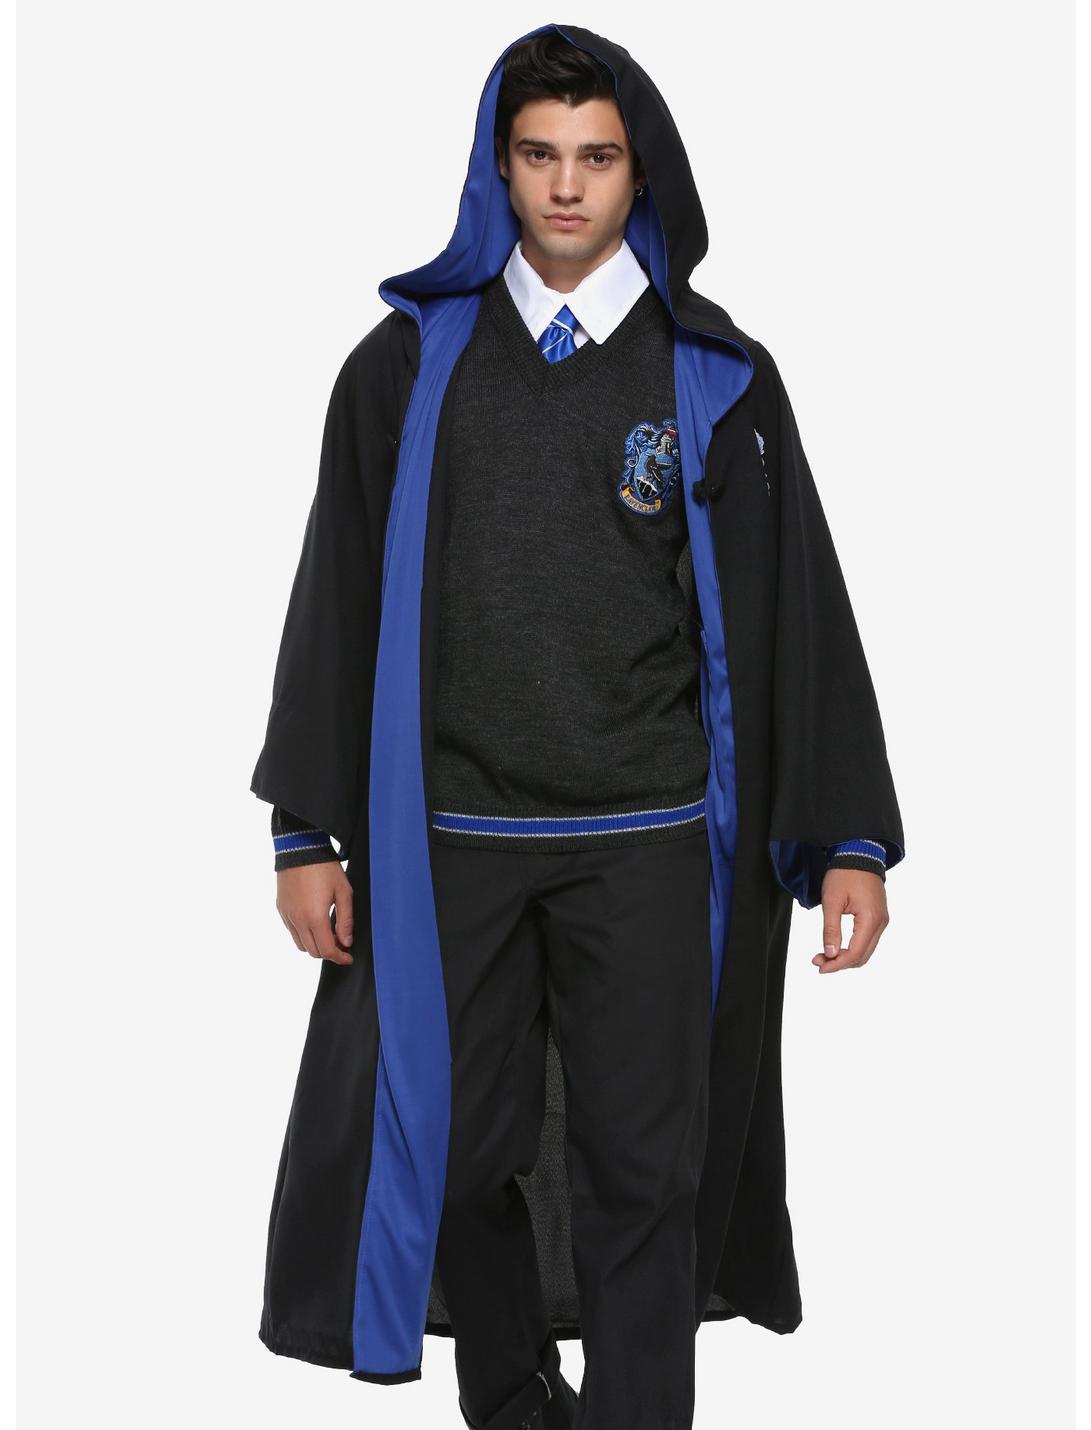 Harry Potter Ravenclaw Student Deluxe Costume Set | Topic